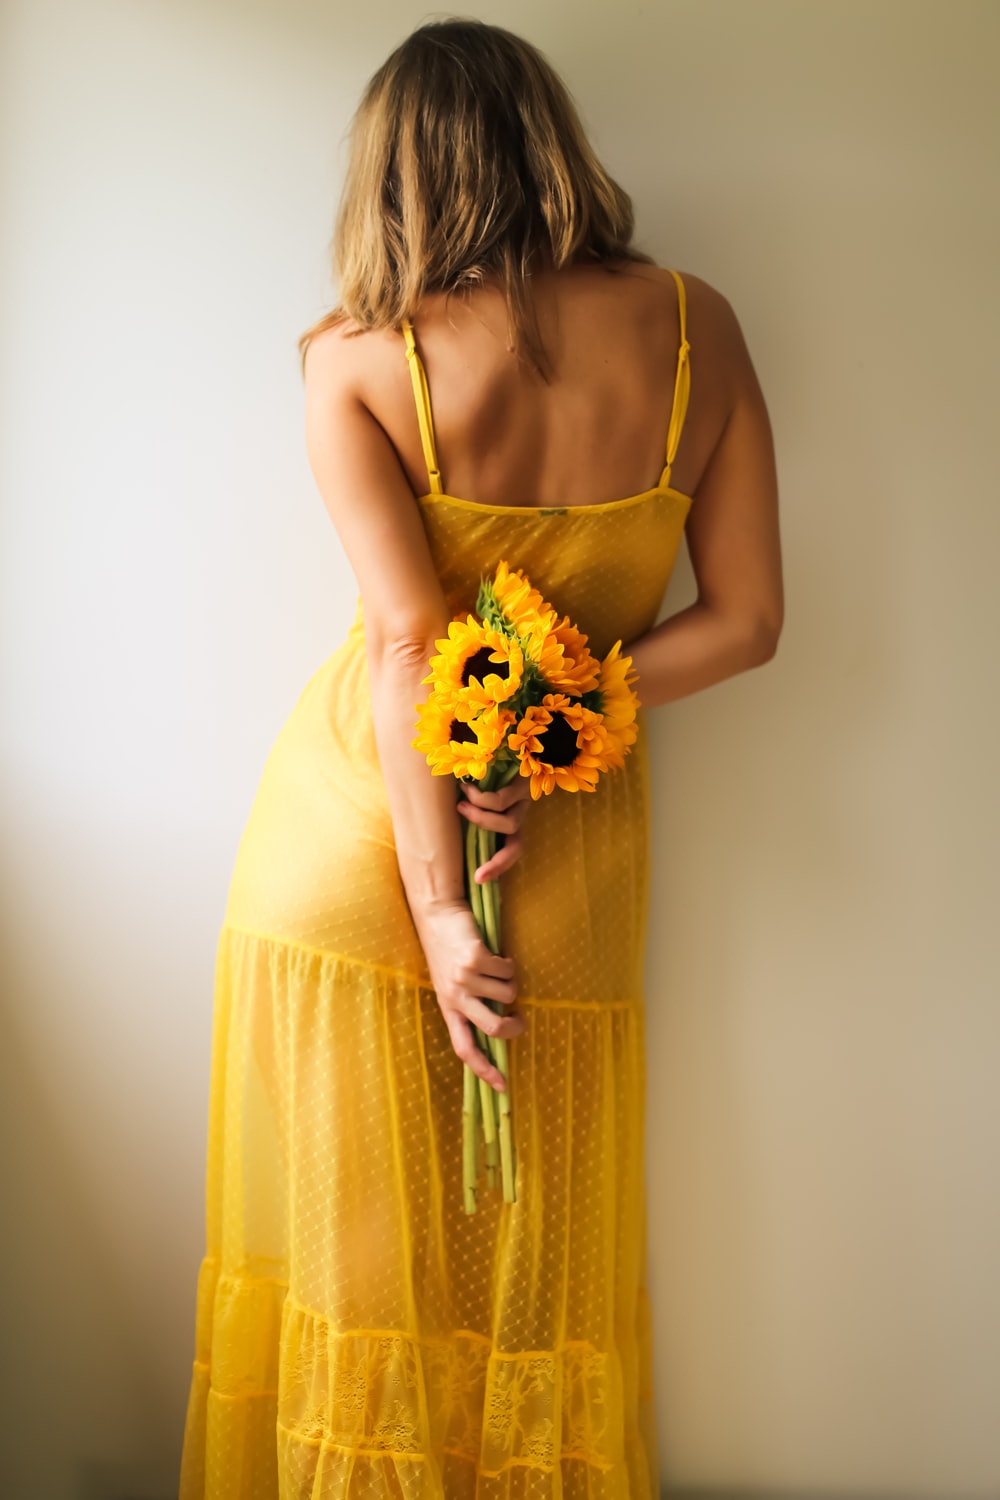 Yellow Dress Picture. Download Free Image